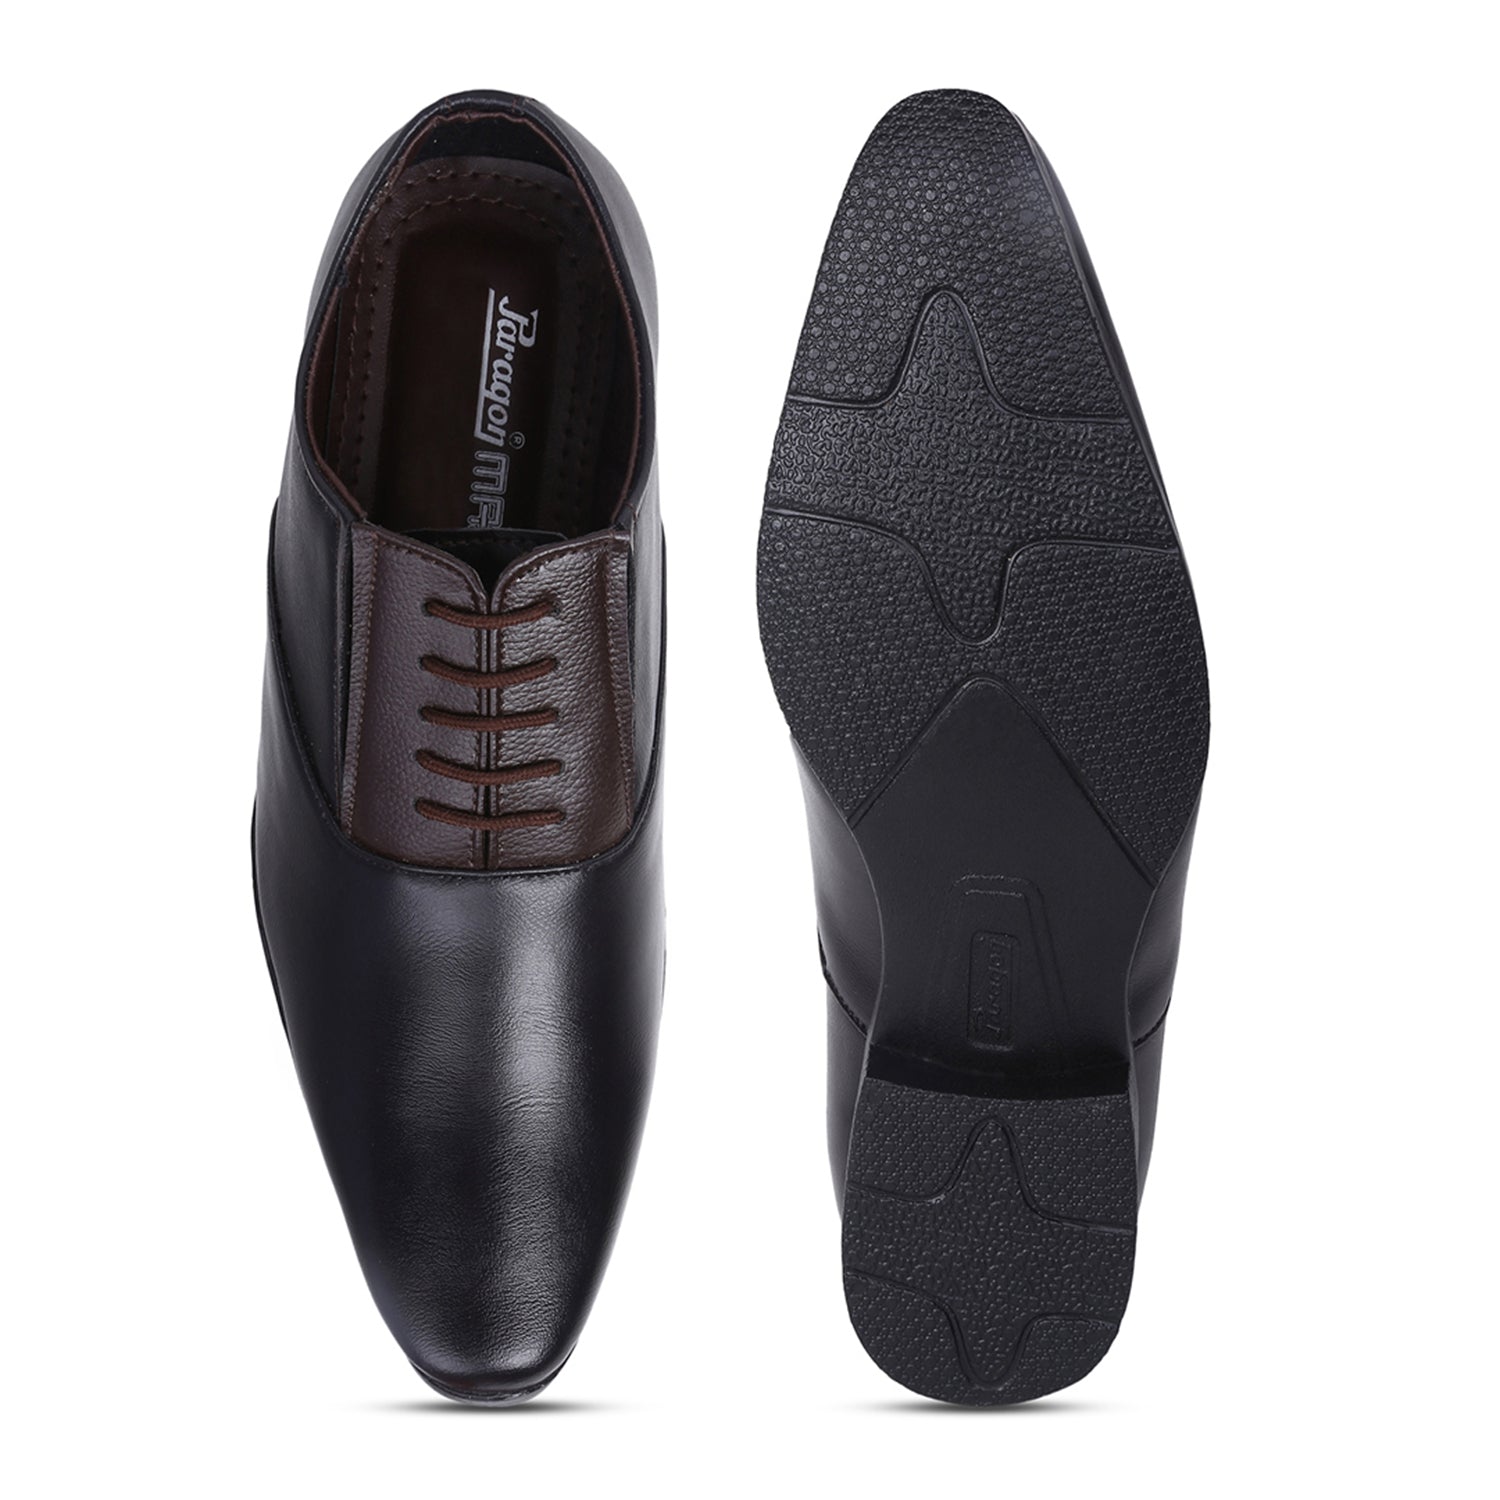 Paragon RK11233G Men Formal Shoes | Corporate Office Shoes | Smart &amp; Sleek Design | Comfortable Sole with Cushioning | Daily &amp; Occasion Wear